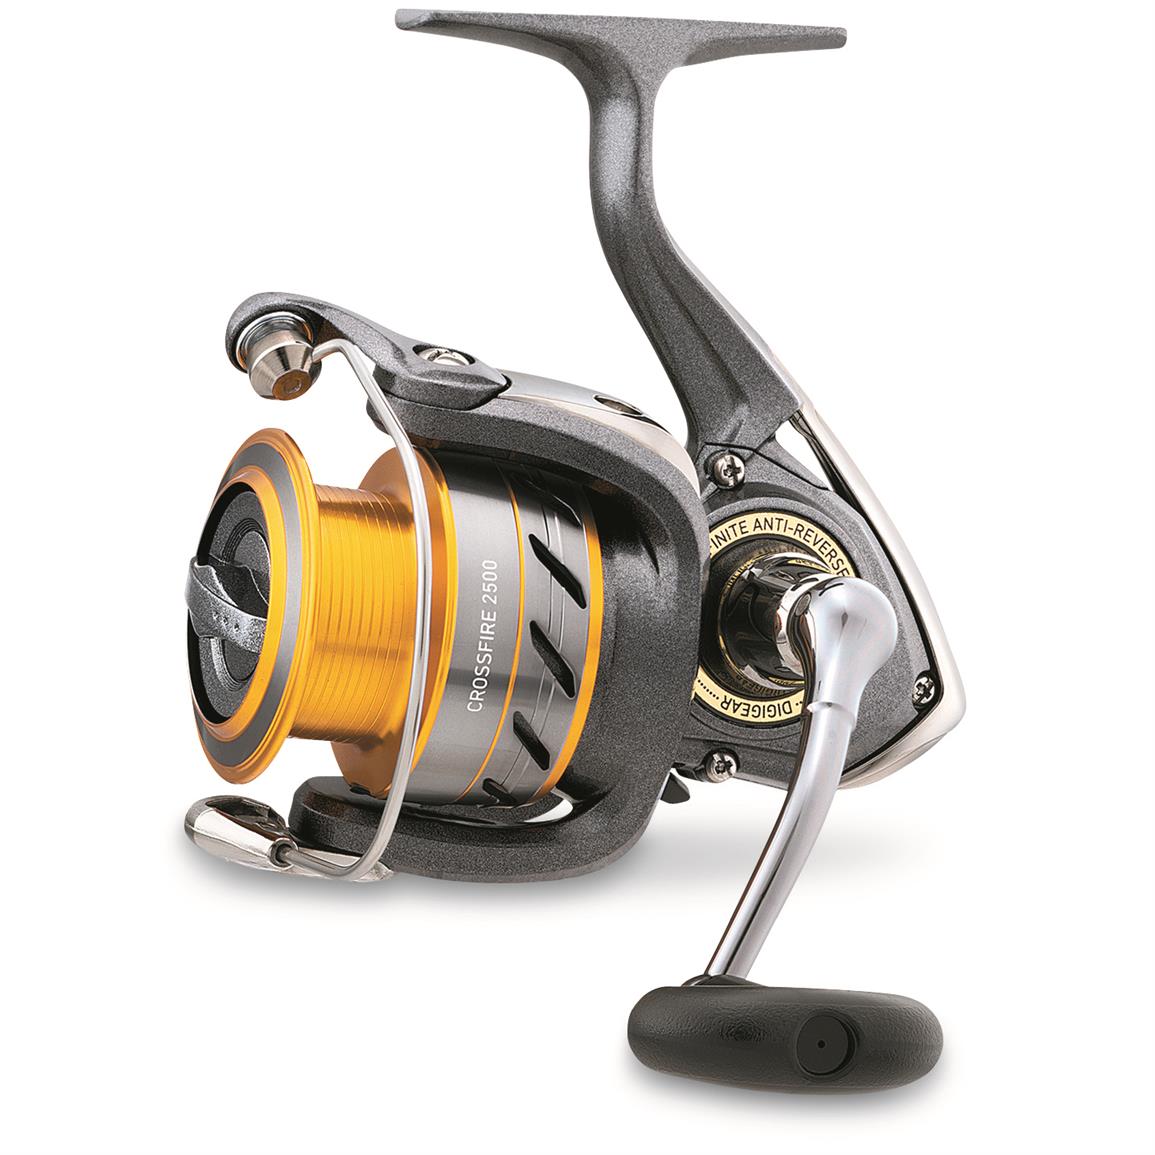 Daiwa Crossfire Spinning Reel 680074 Spinning Reels At Sportsman S Guide